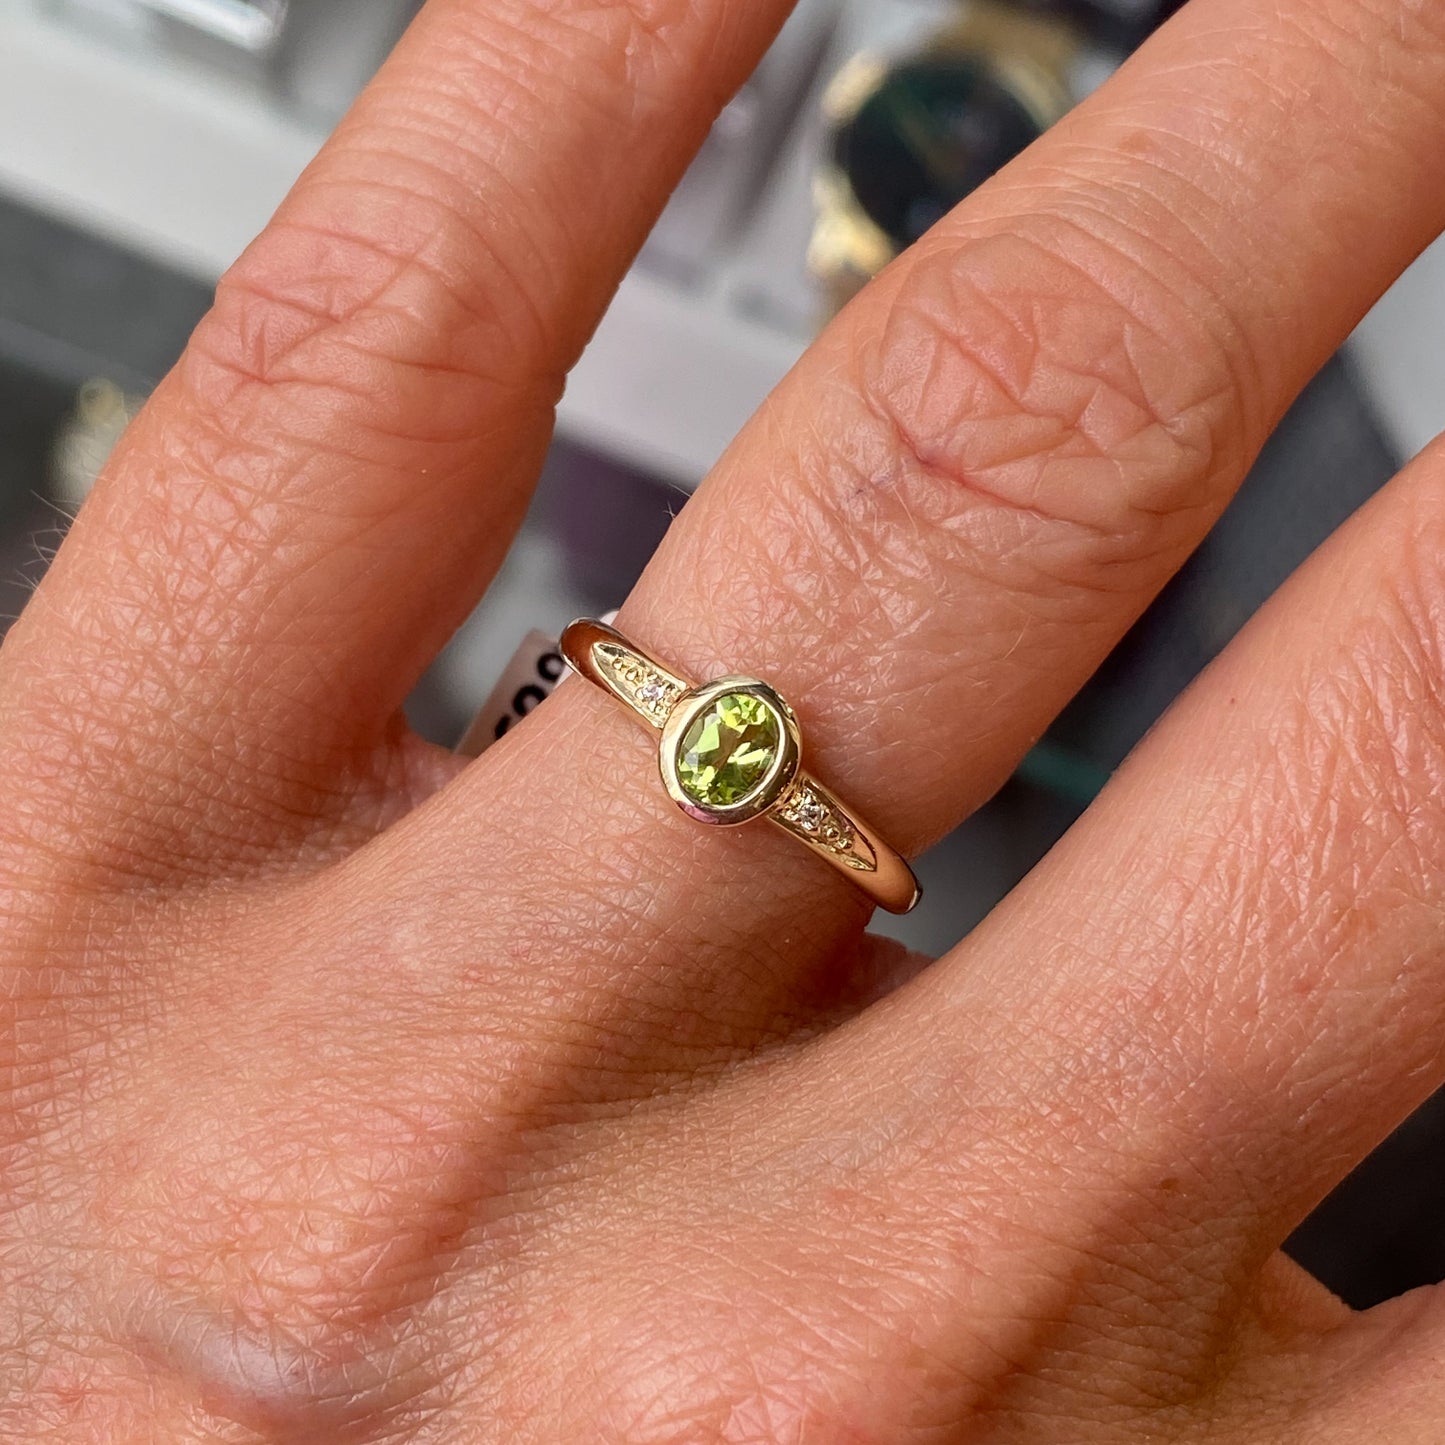 9ct Gold Oval Solitaire Ring - Peridot & White Topaz - John Ross Jewellers